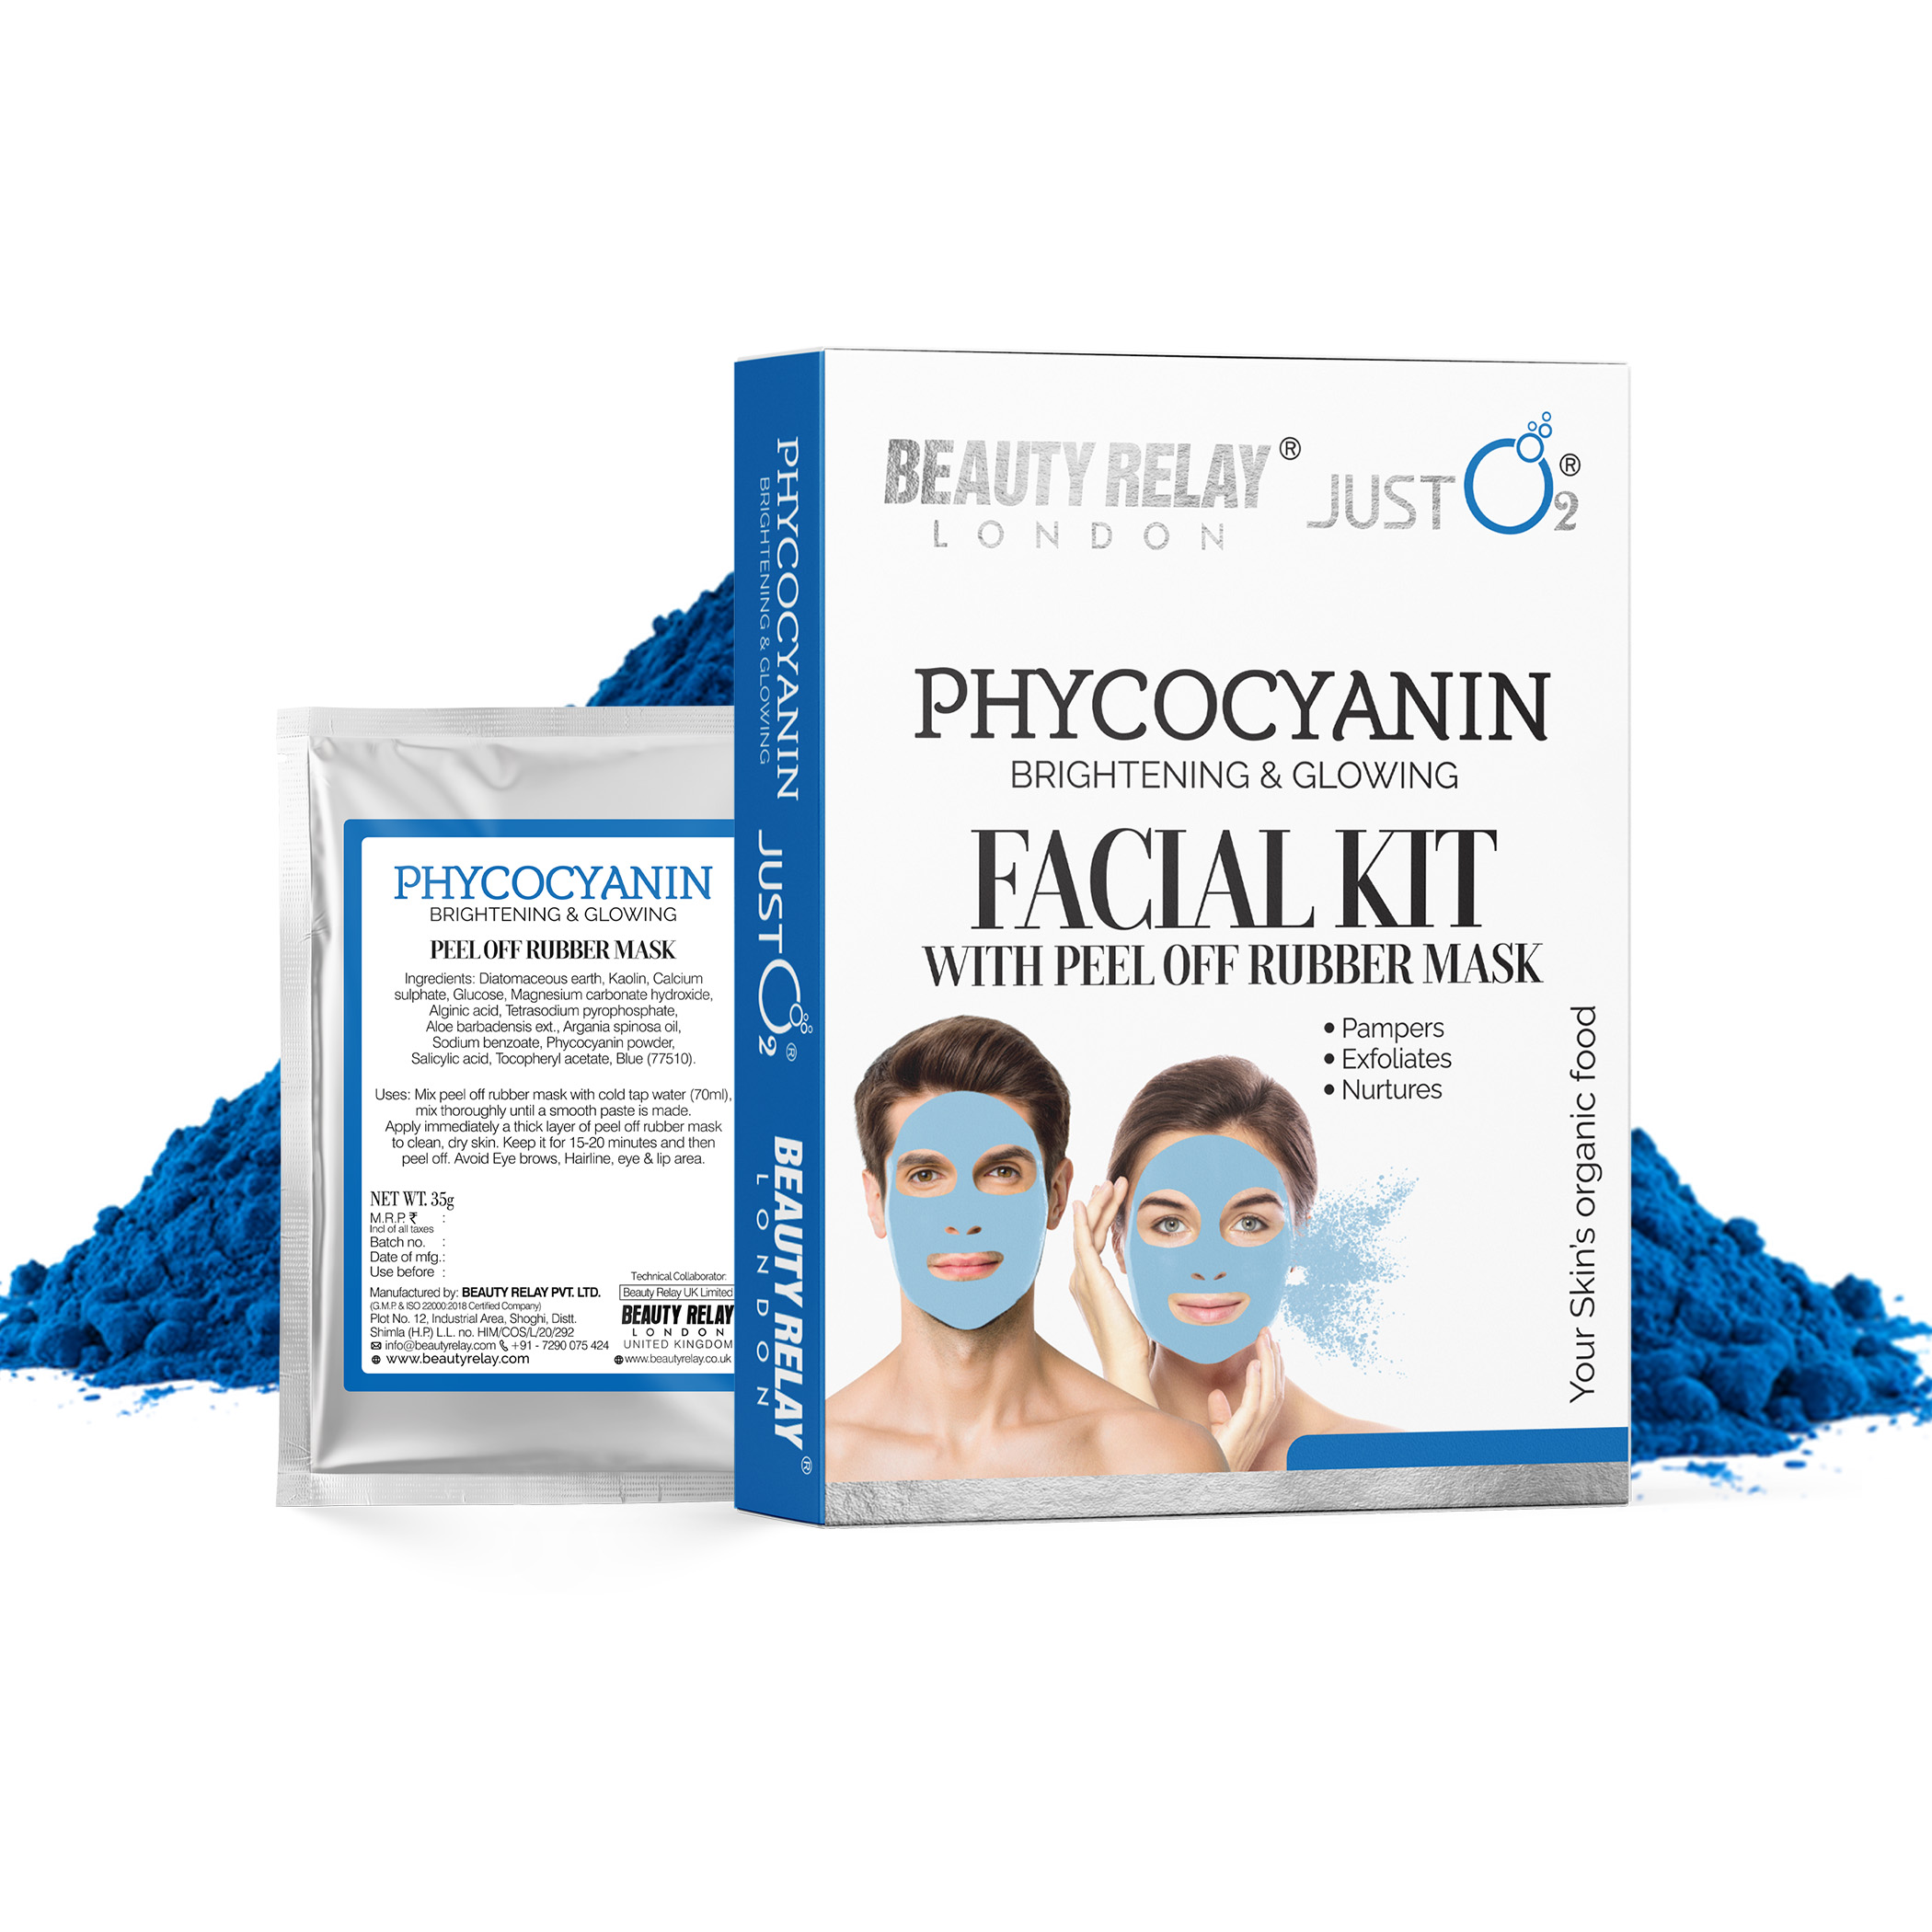 Phycocyanin Facial Kit with Peel-off Rubber Mask - 59g